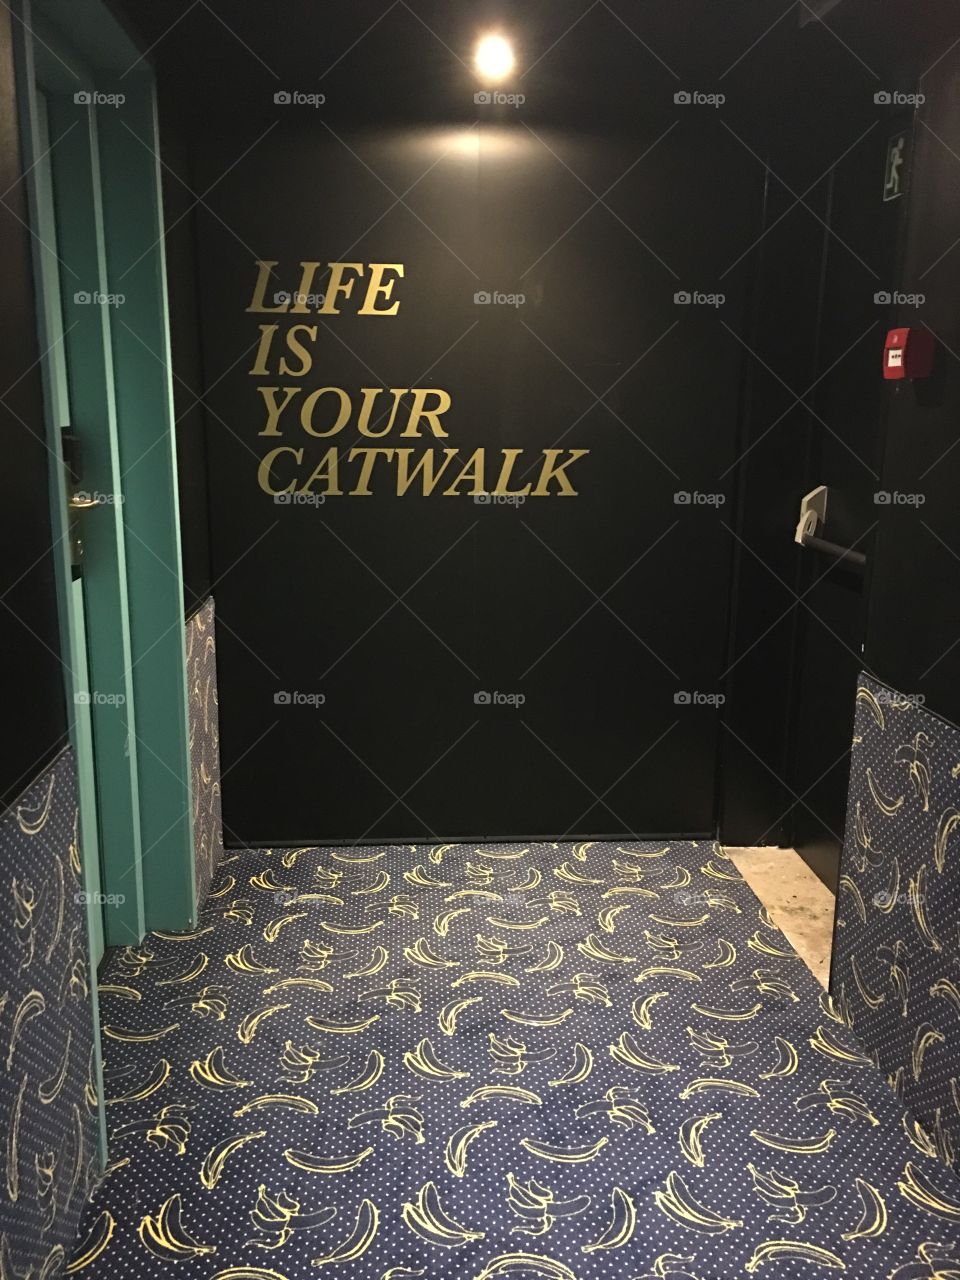 Life is your cat walk